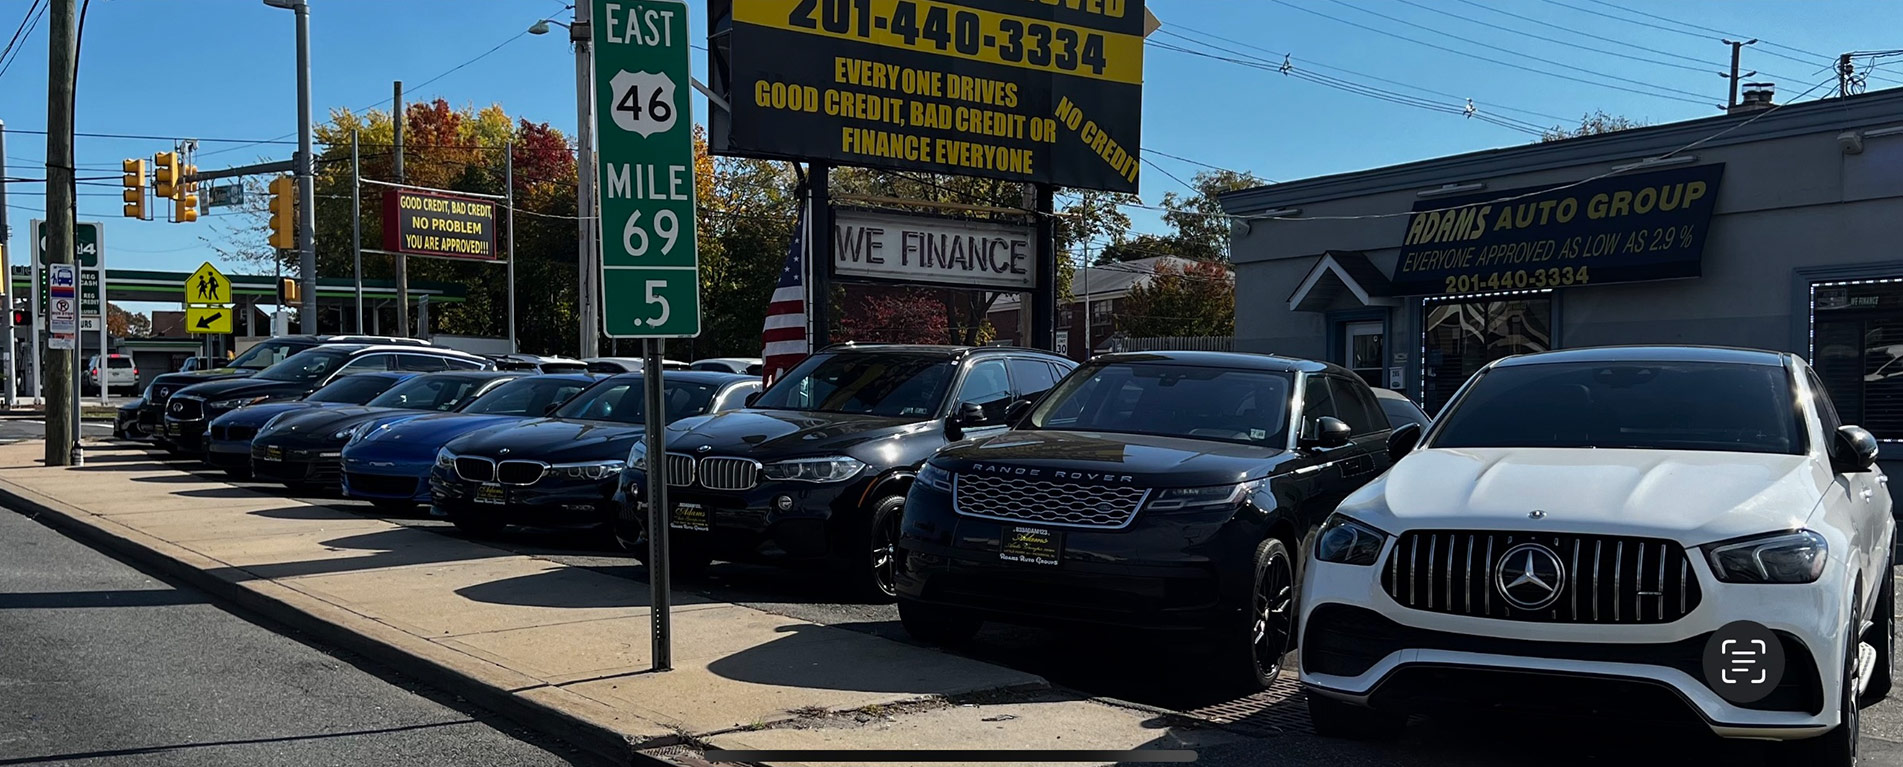 Used cars for sale in Paterson | Adams Auto Group. Paterson NJ